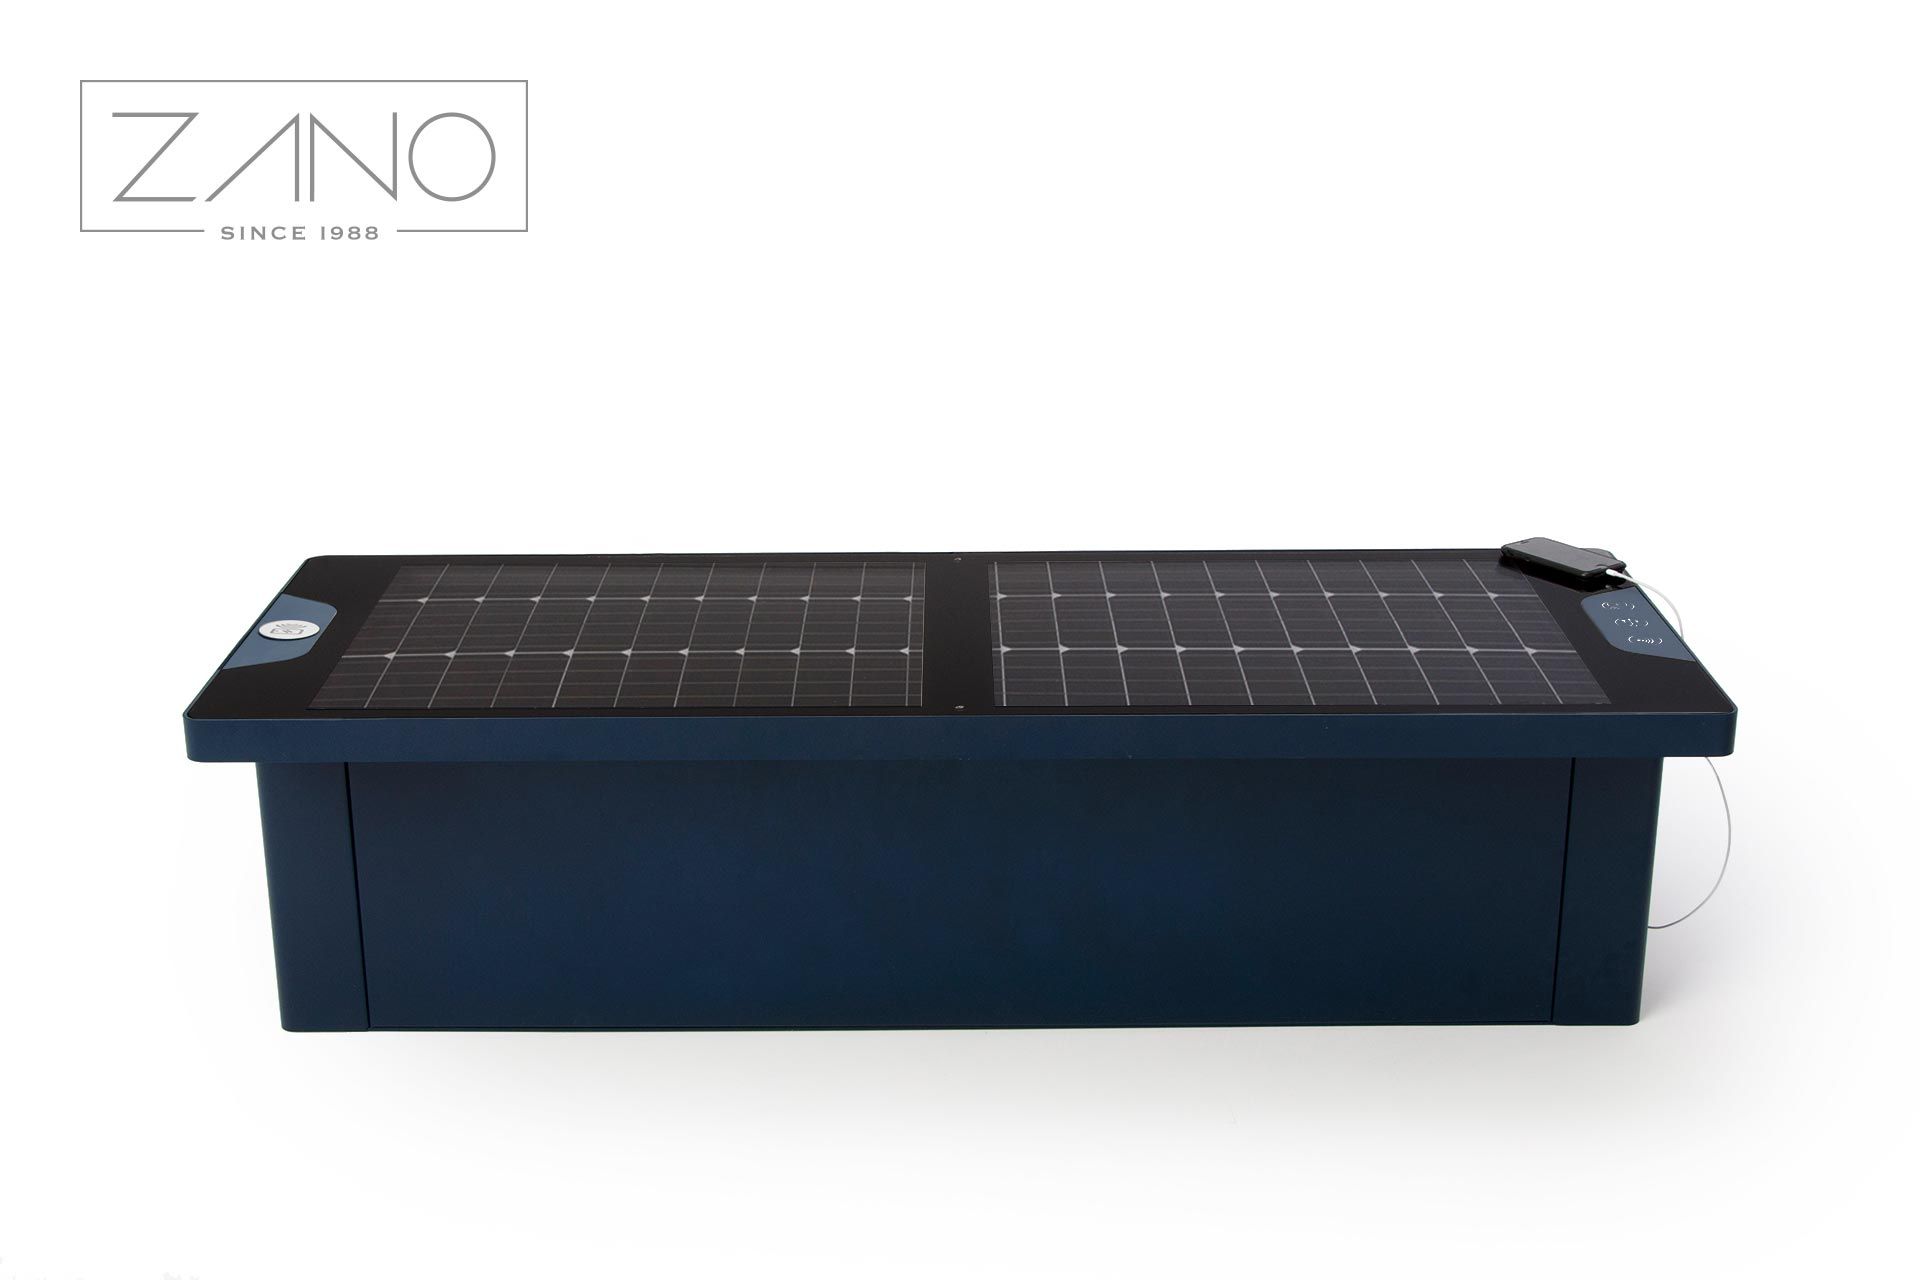 smart benches equipped with inductive chargers, usb and lighting